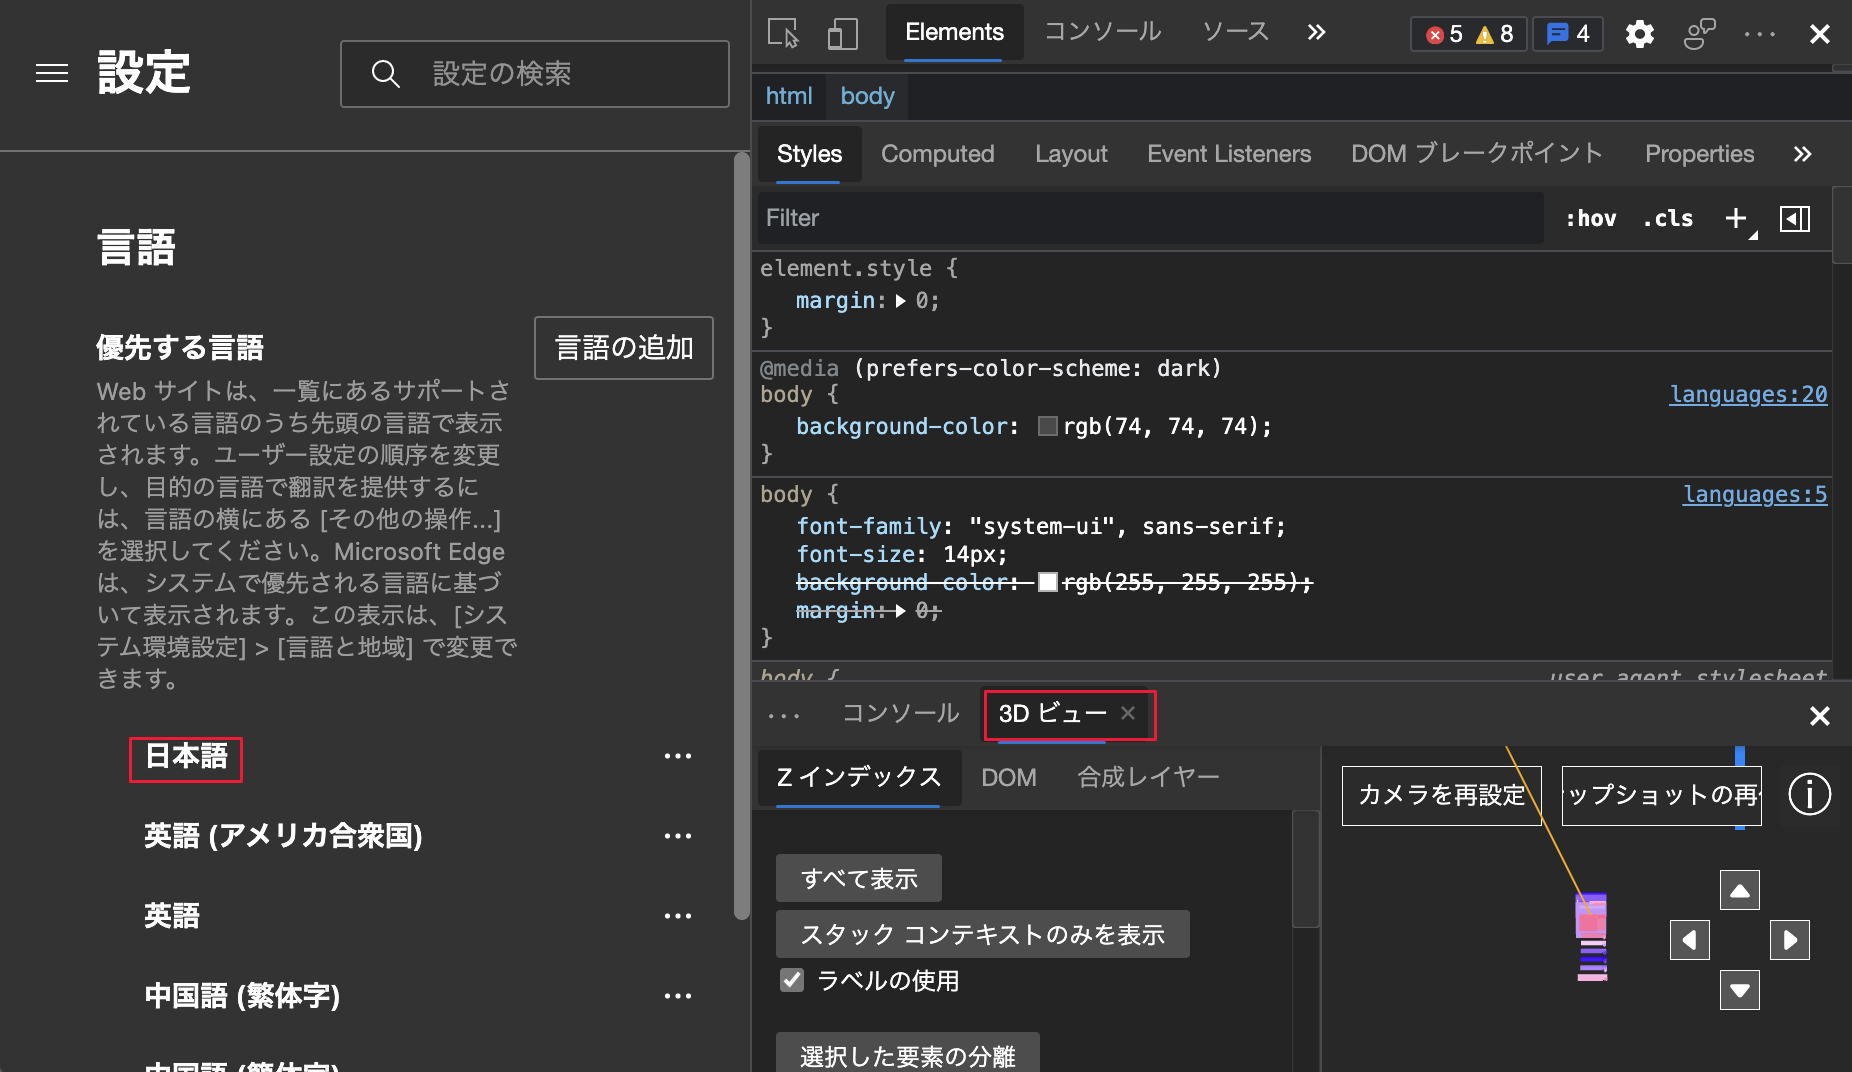 Microsoft Edge browser and DevTools set to Japanese.